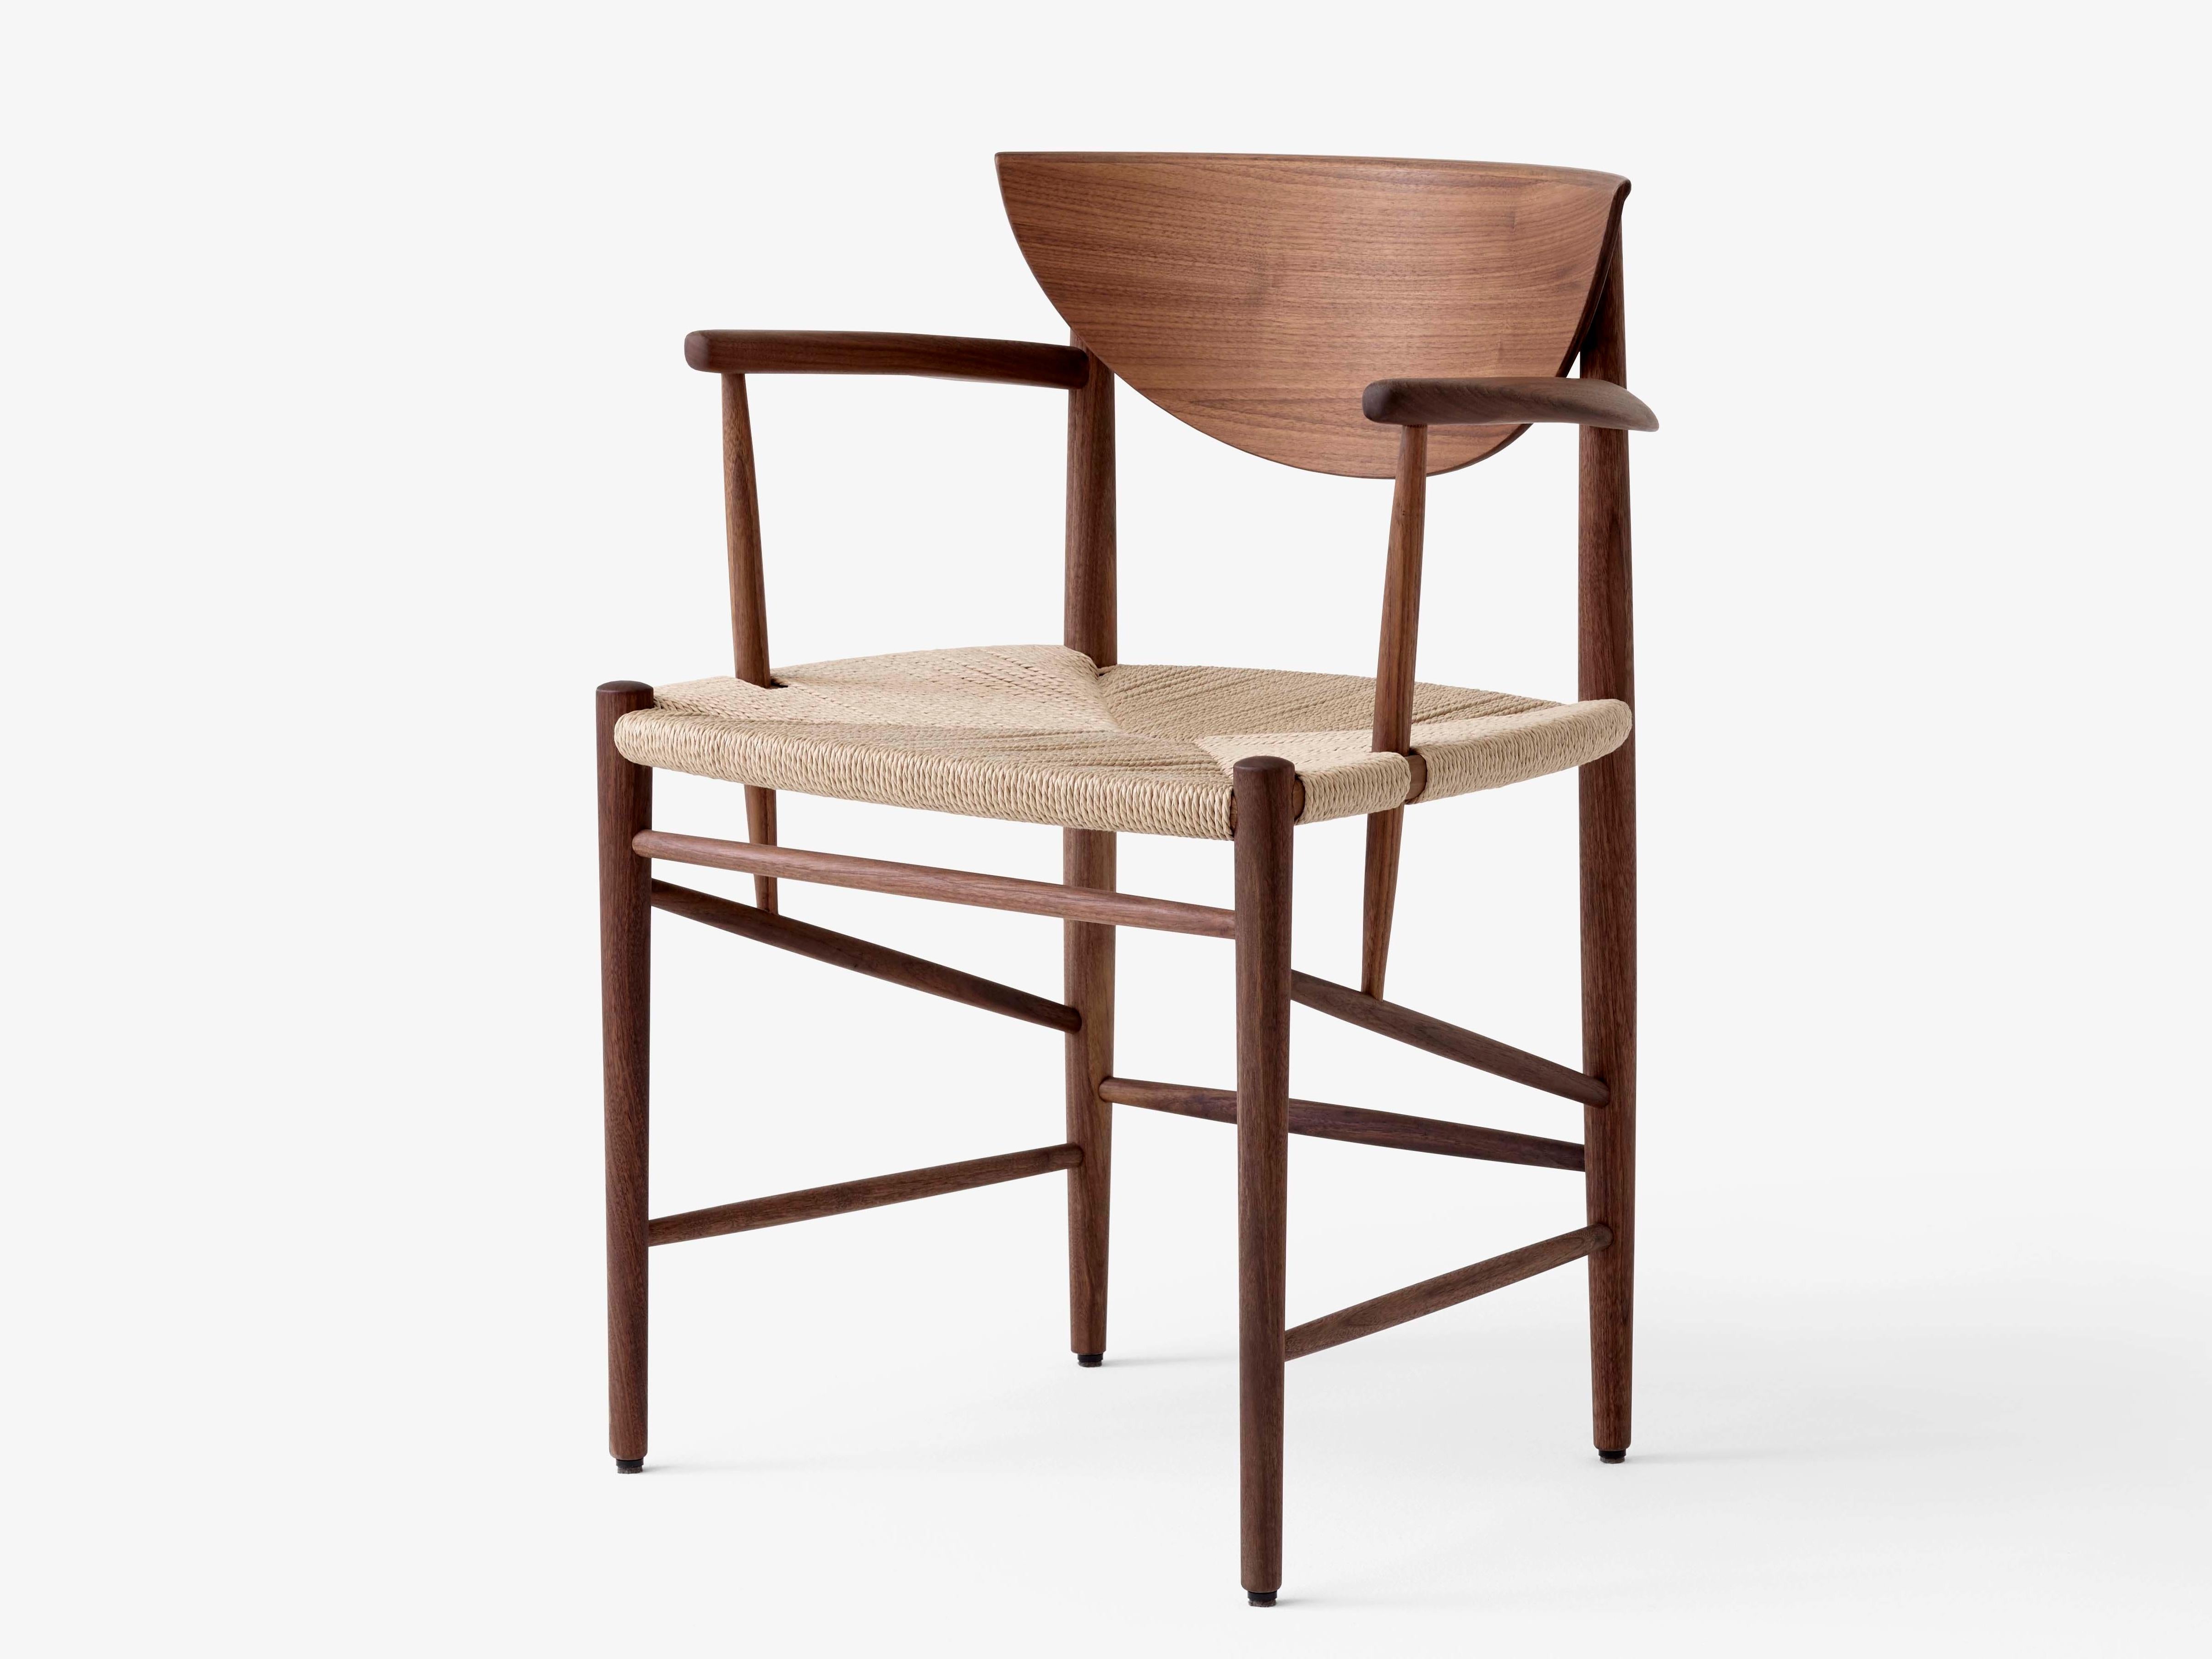 Drawn armchair HM4 or model 317 by Hvidt and Mølgaard. New edition. The 1956 Drawn chair by Hvidt & Mølgaard stands out as a definitive piece of Danish design. Relying upon traditional craftsmanship techniques and built out of organic materials, it